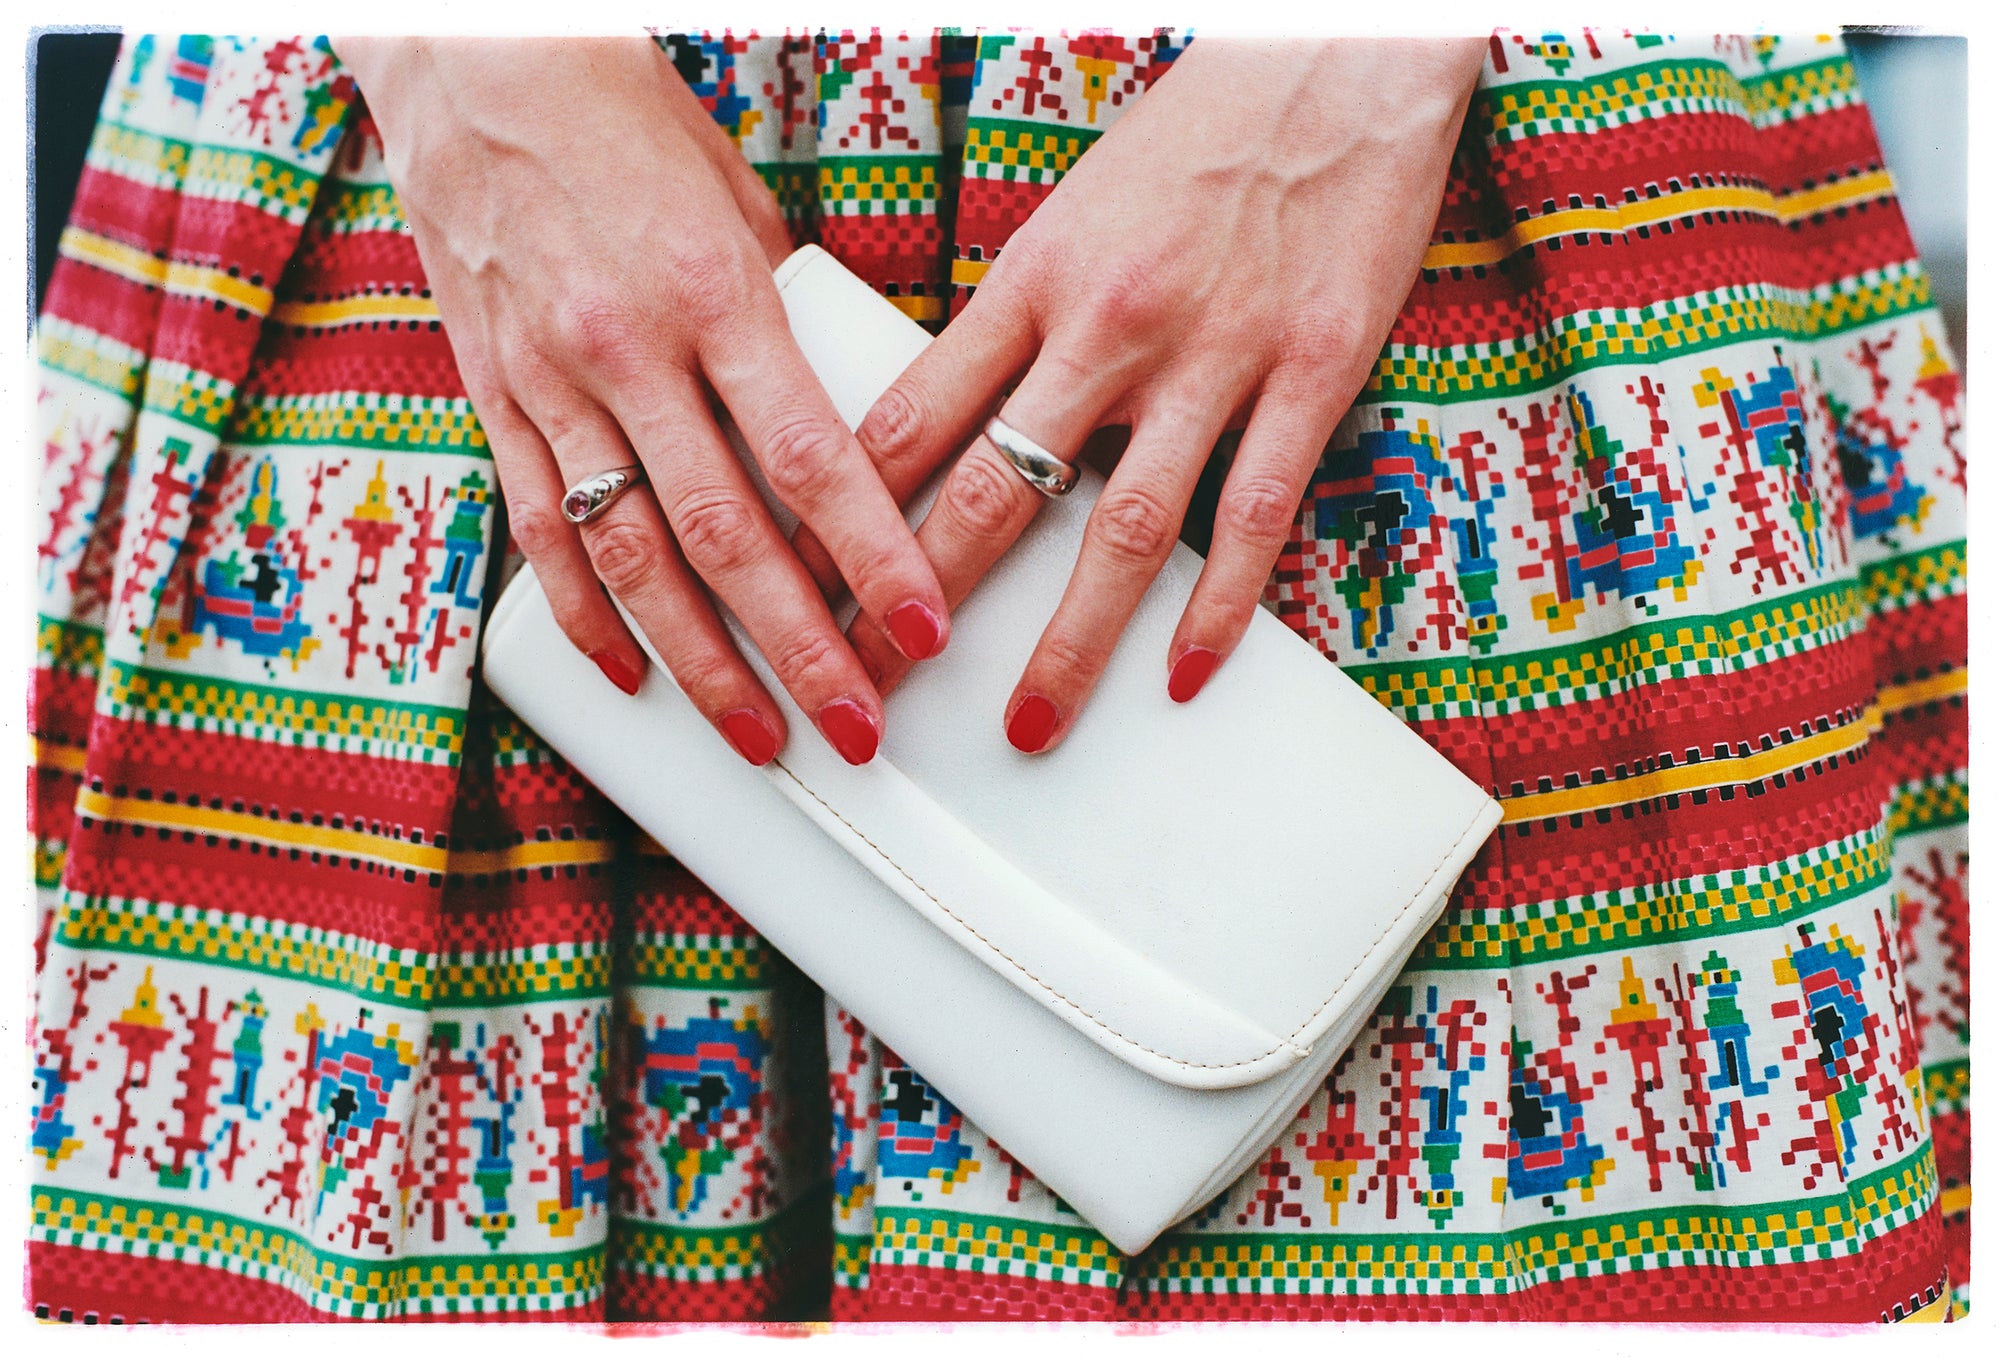 Photograph by Richard Heeps.  A white clutchbag, held by a pair of hands set against a vintage red patterned skirt.  